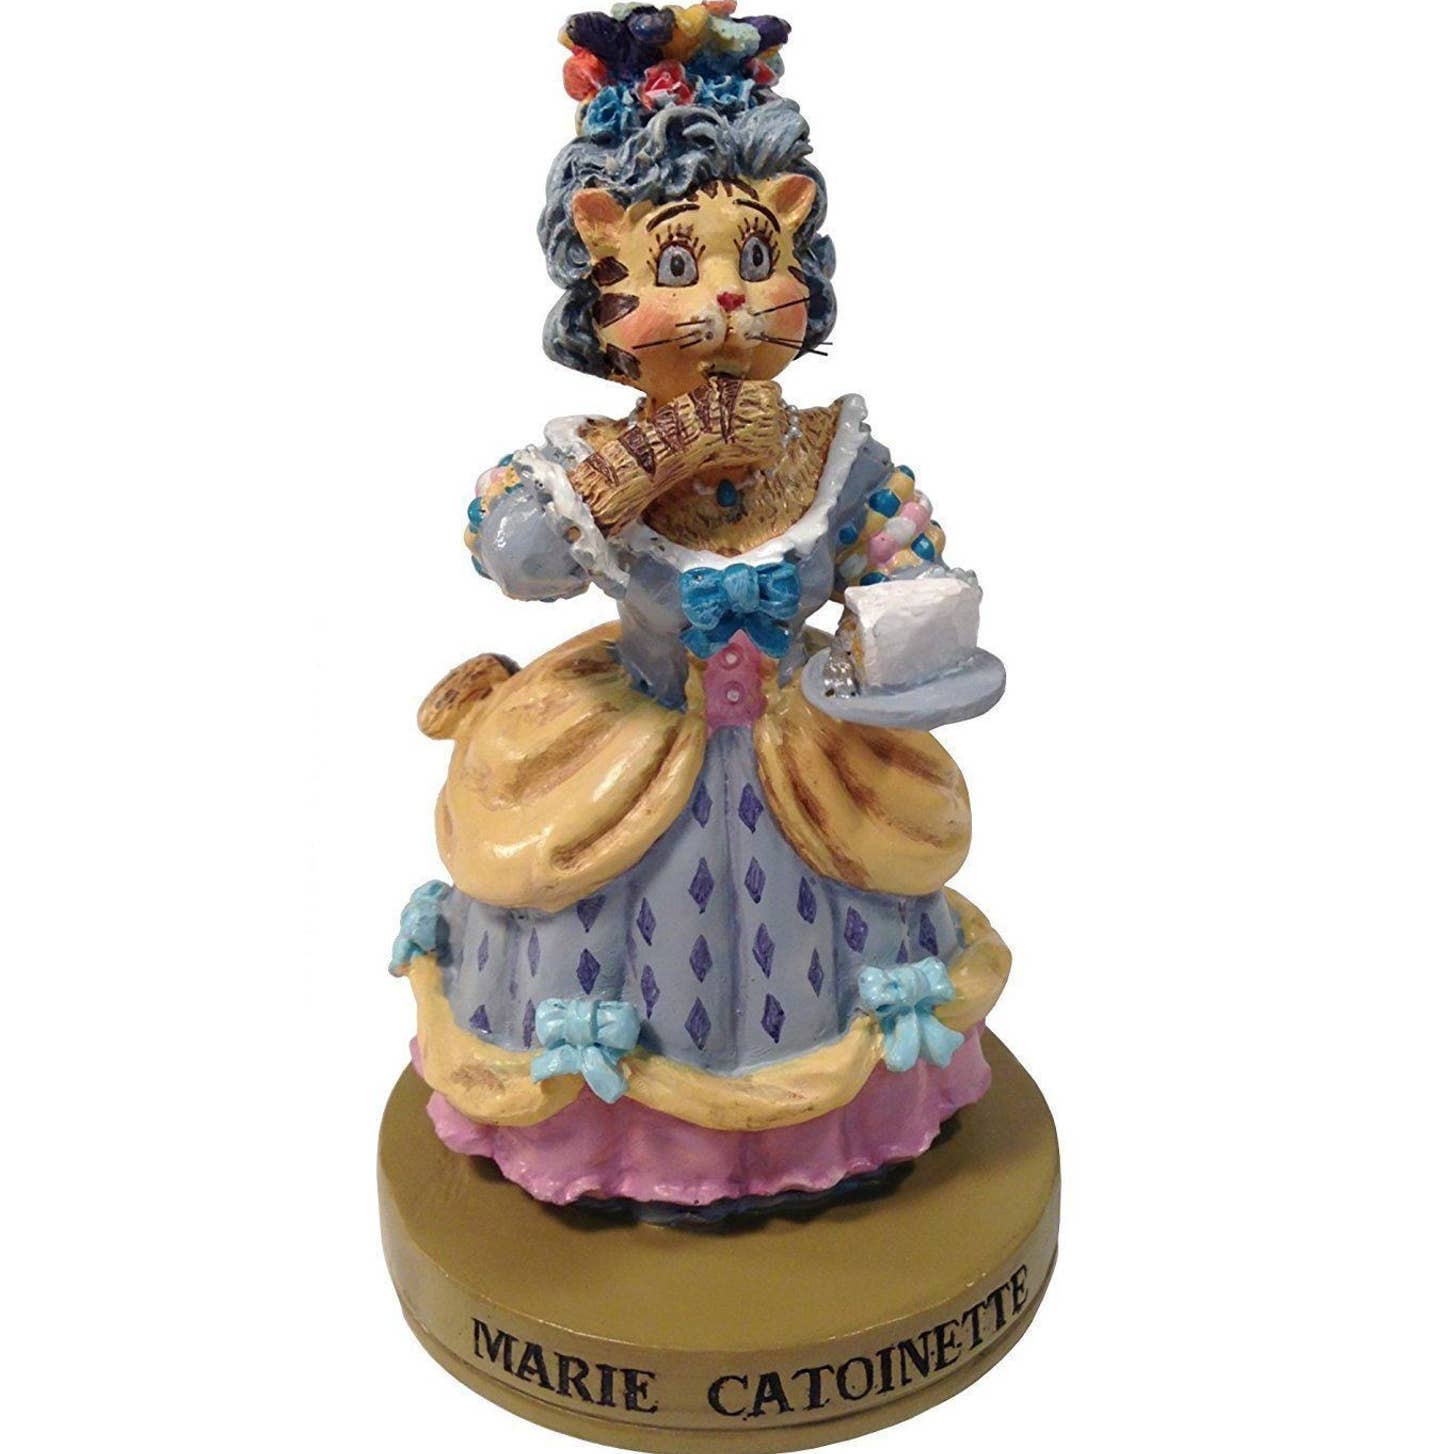 Ertl Marie Catoinette Figurine Cat Hall of Fame Collectible Kitty Collector 4"